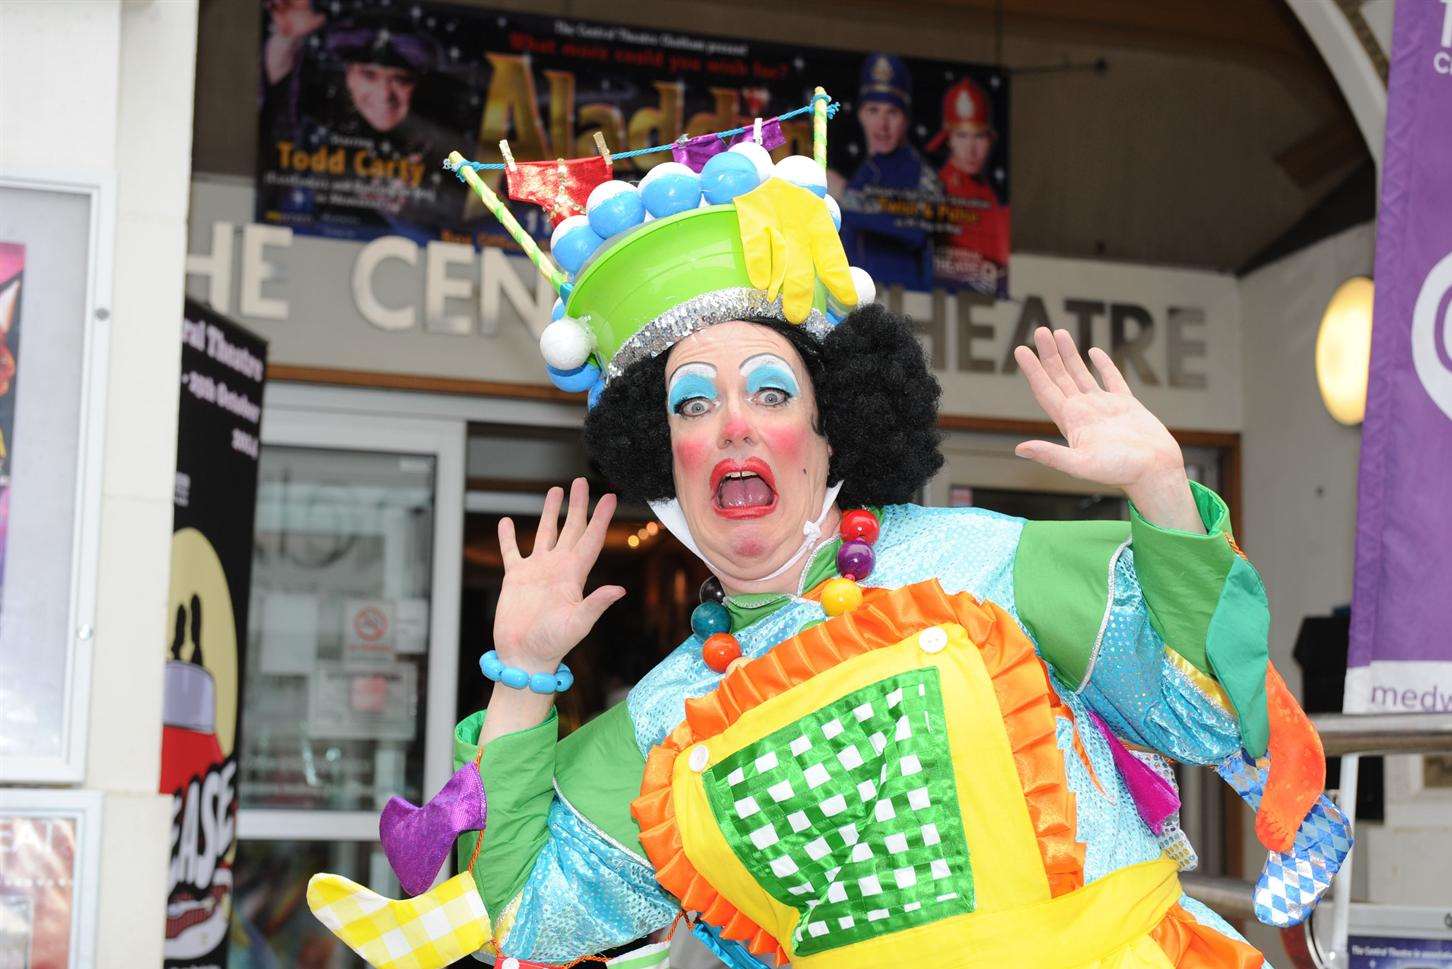 Mark Siney in Chatham's Central Theatre panto